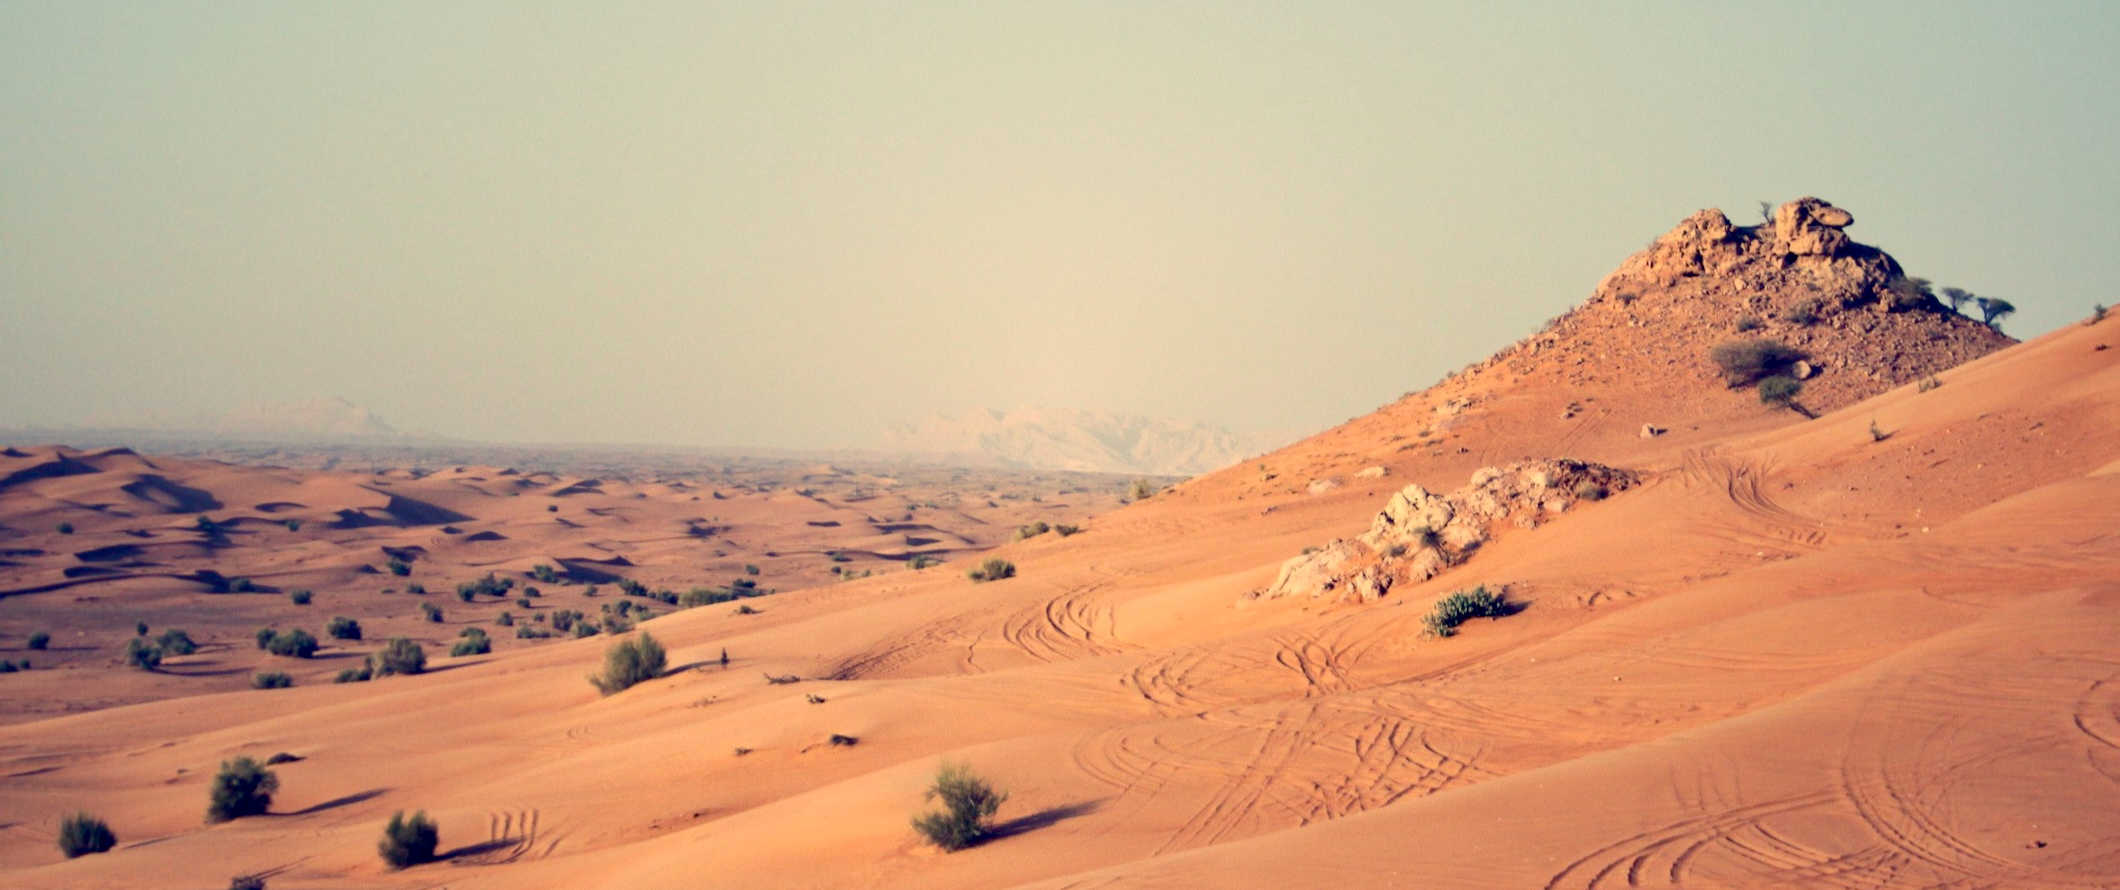 The sprawling sands and dunes of Dubai rolling into the arid distance